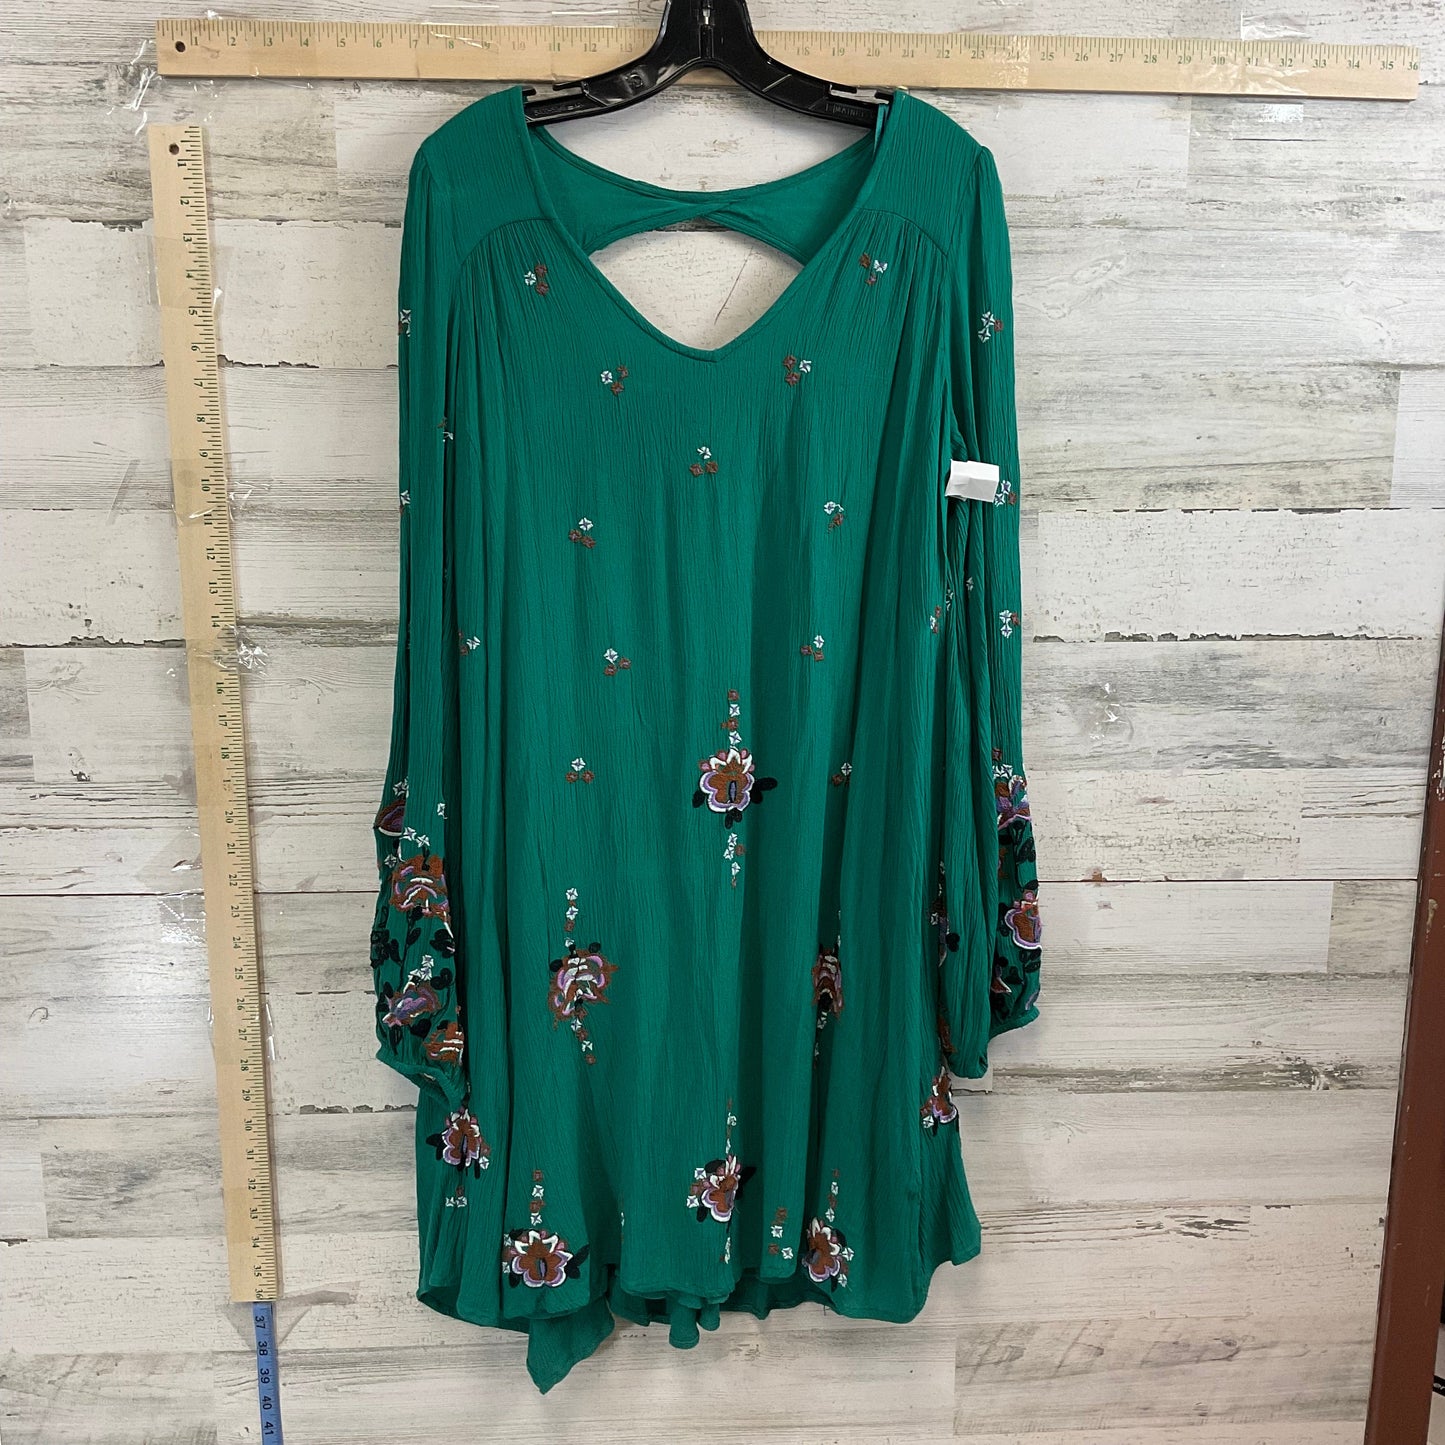 Green Dress Casual Short Free People, Size L